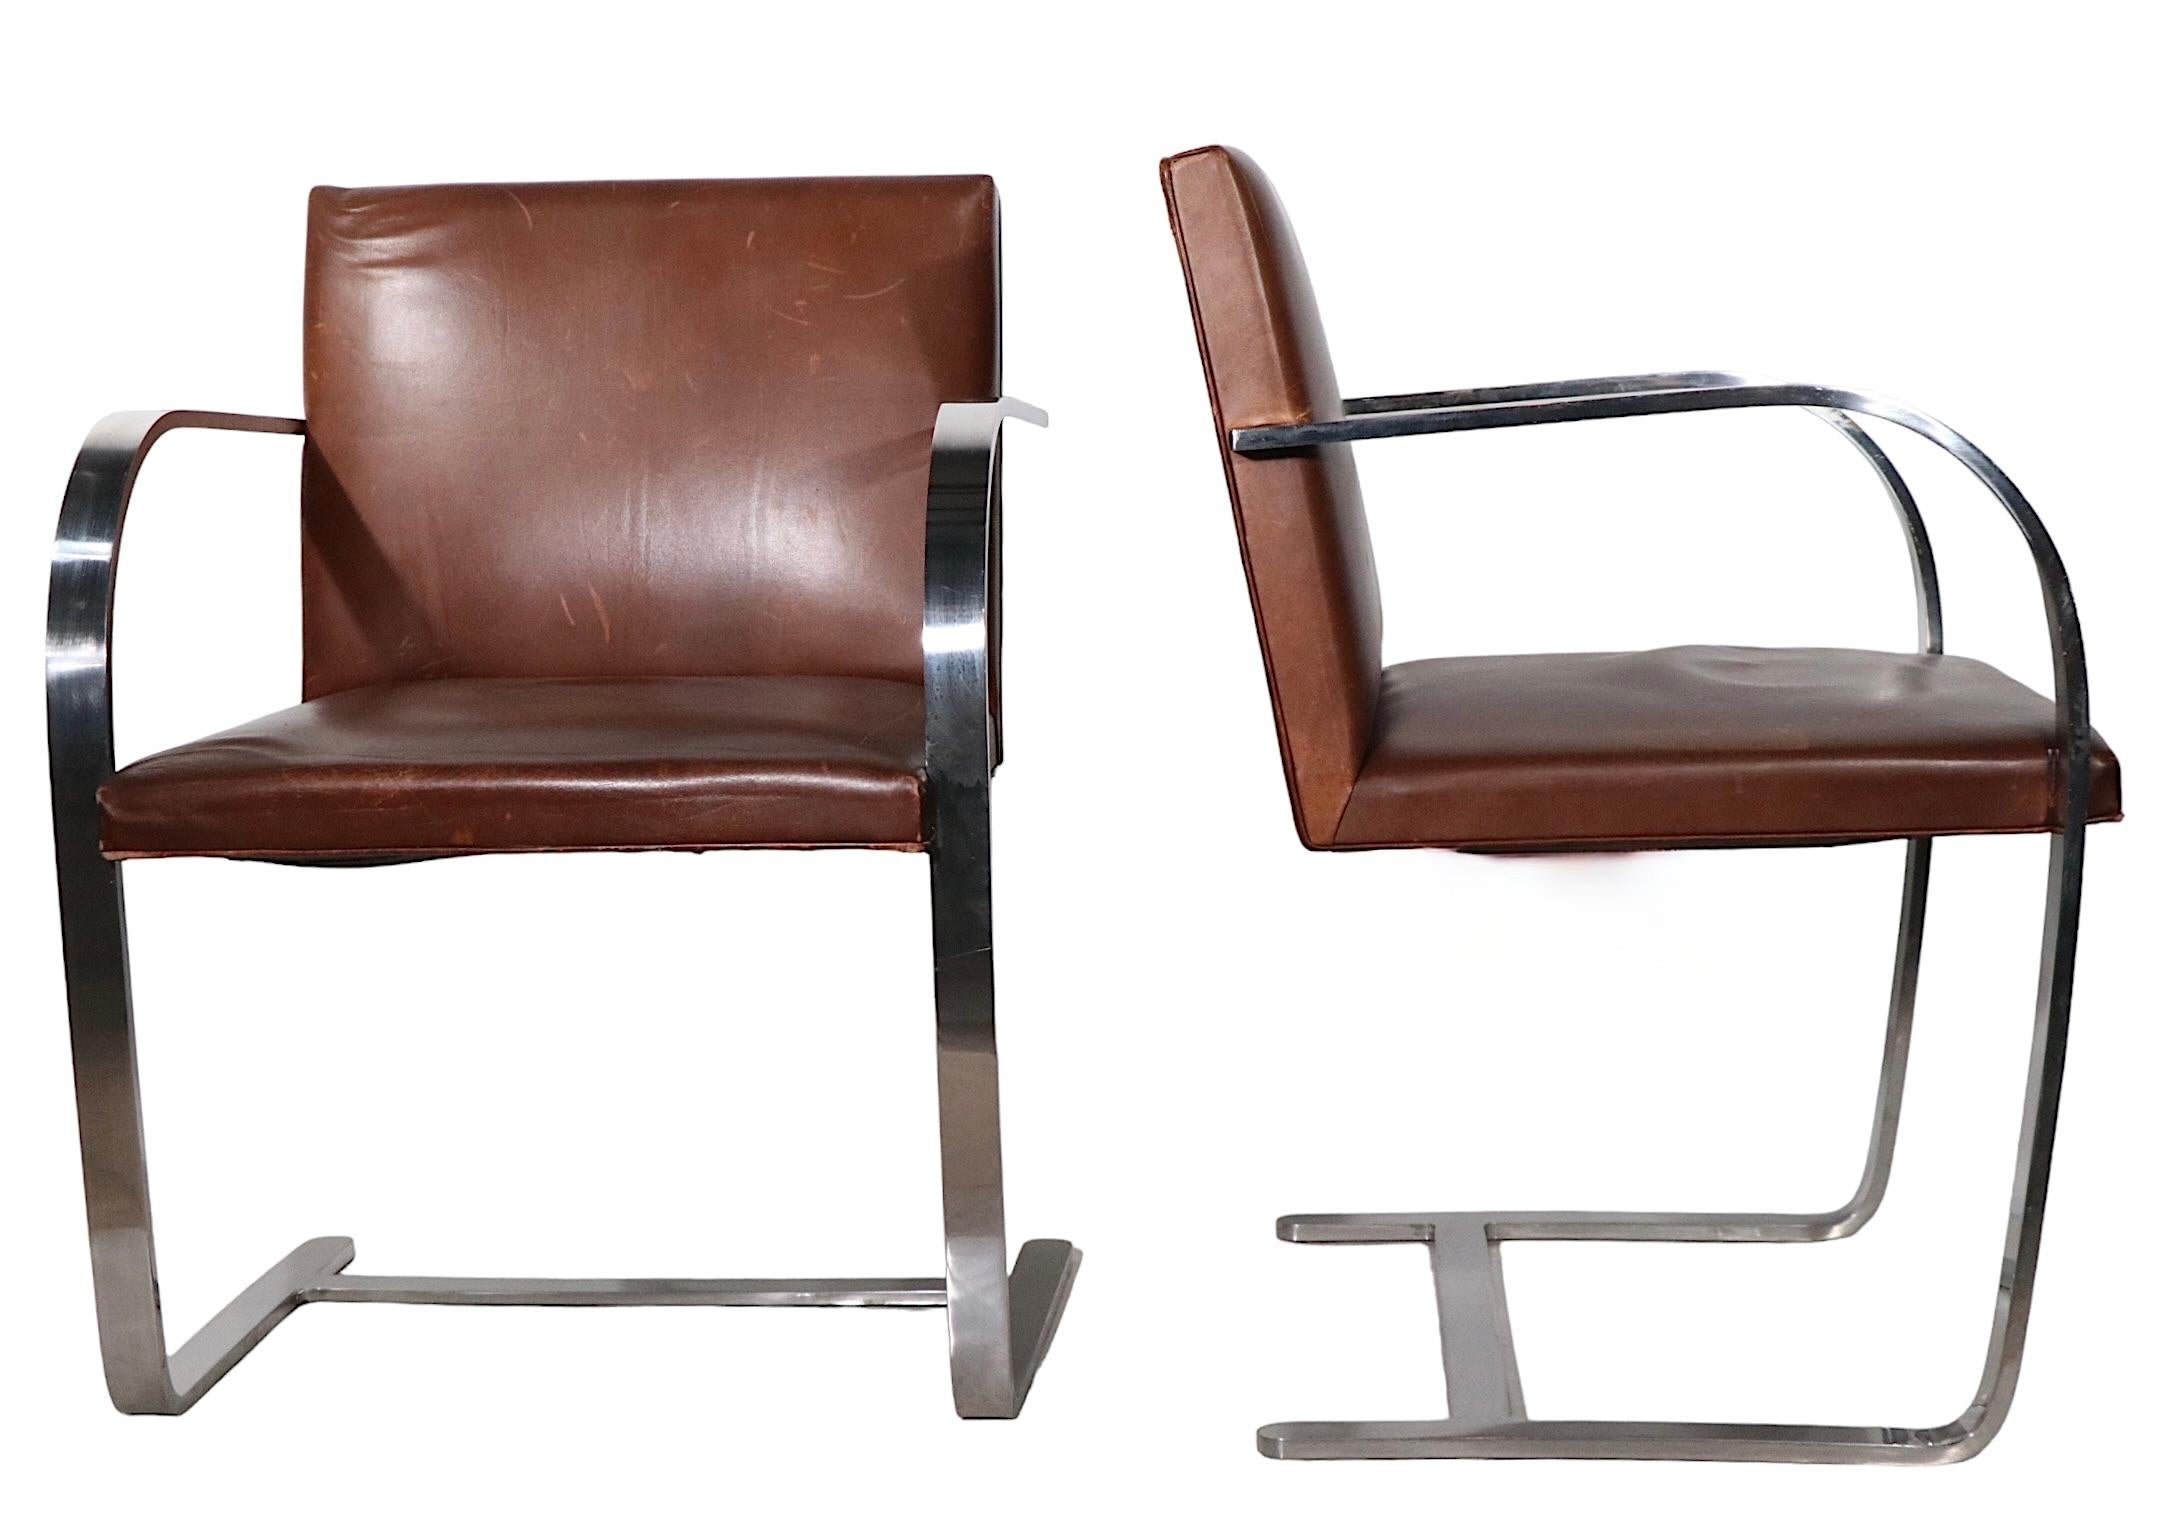 Pr. Meis Van Der Rohe Designed Brno Chairs by Knoll in Brown Leather 4